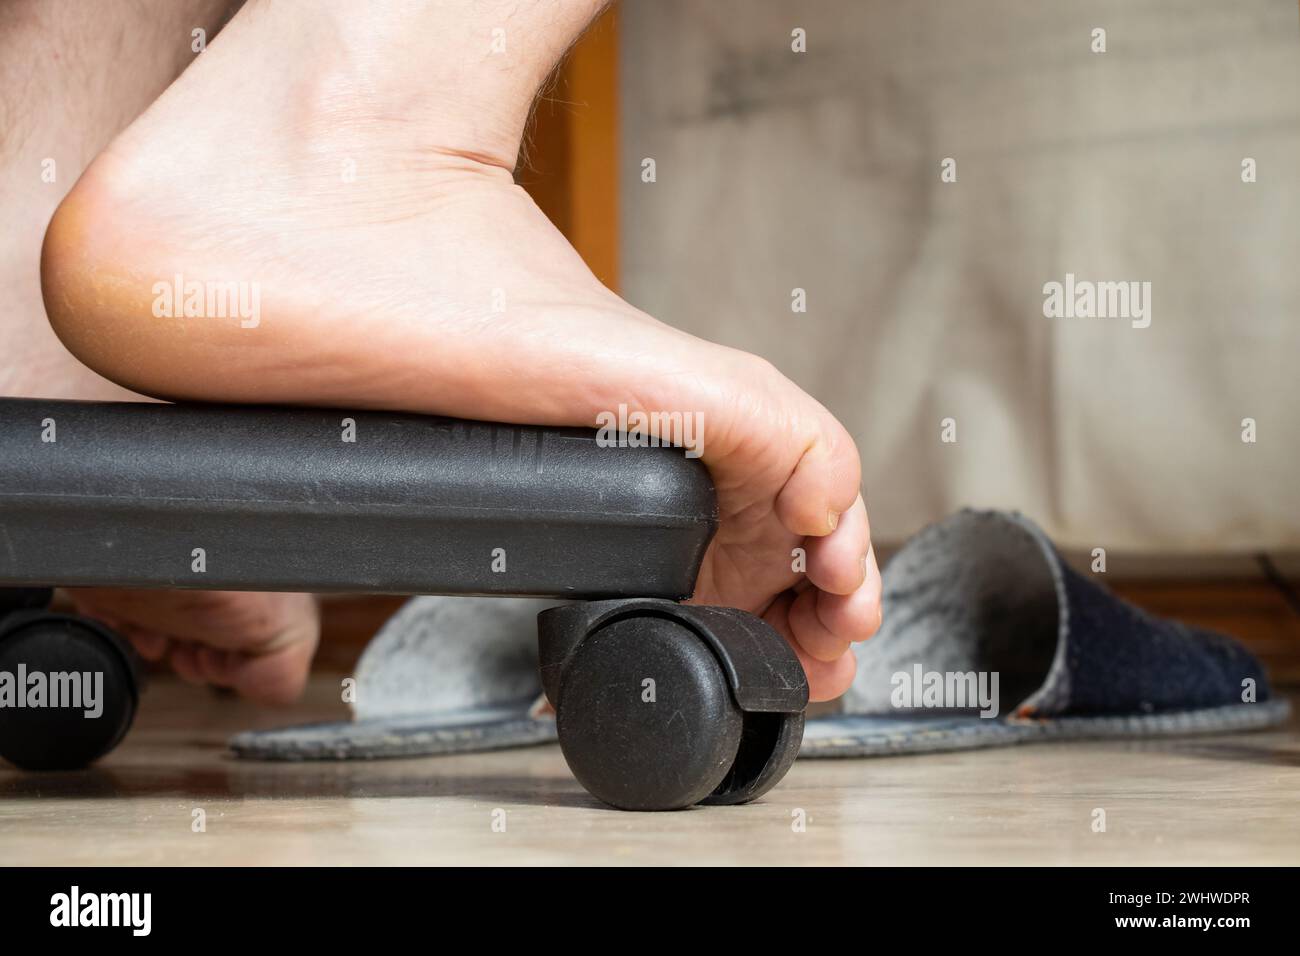 Male leg on a chair at home under the table, male foot close-up Stock Photo